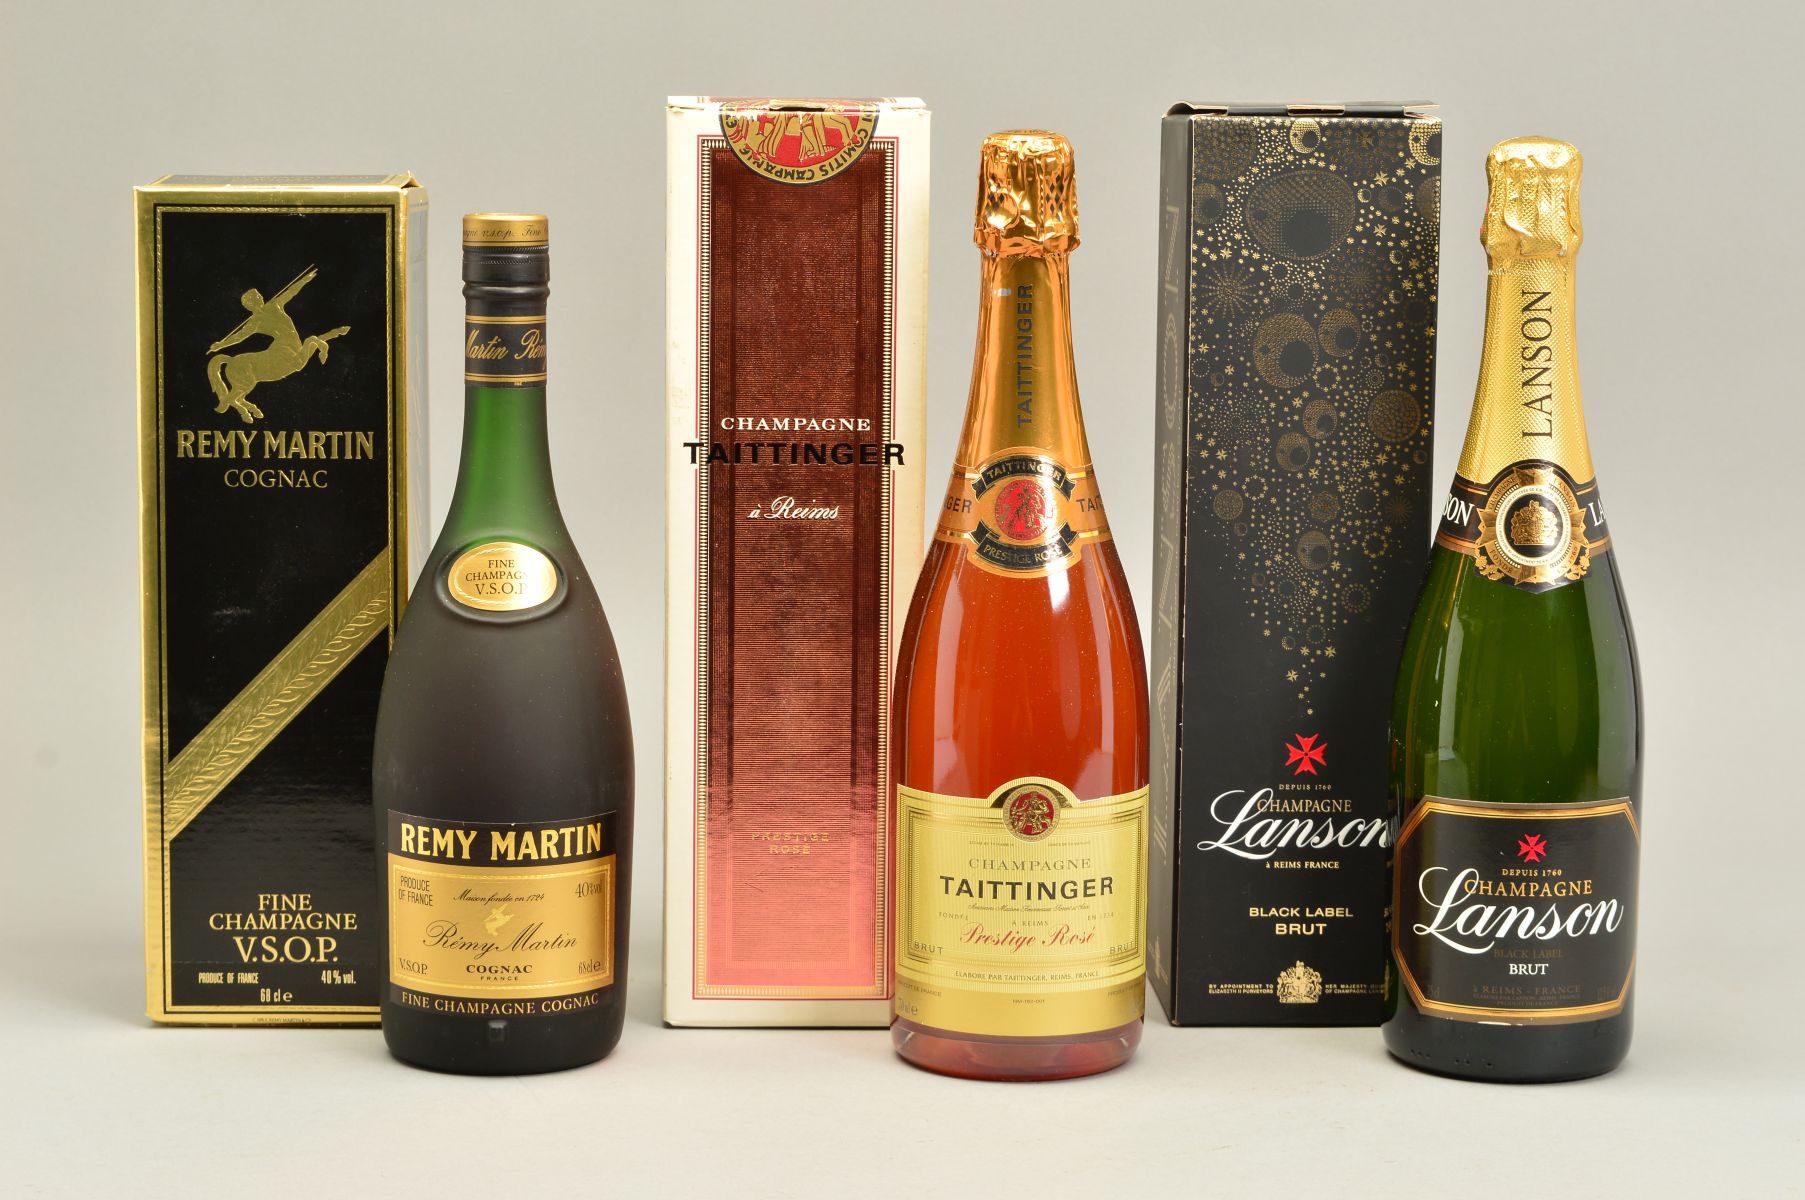 TWO BOTTLES OF CHAMPAGNE AND A BOTTLE OF FINE CHAMPAGNE COGNAC, comprising a bottle of Tattinger